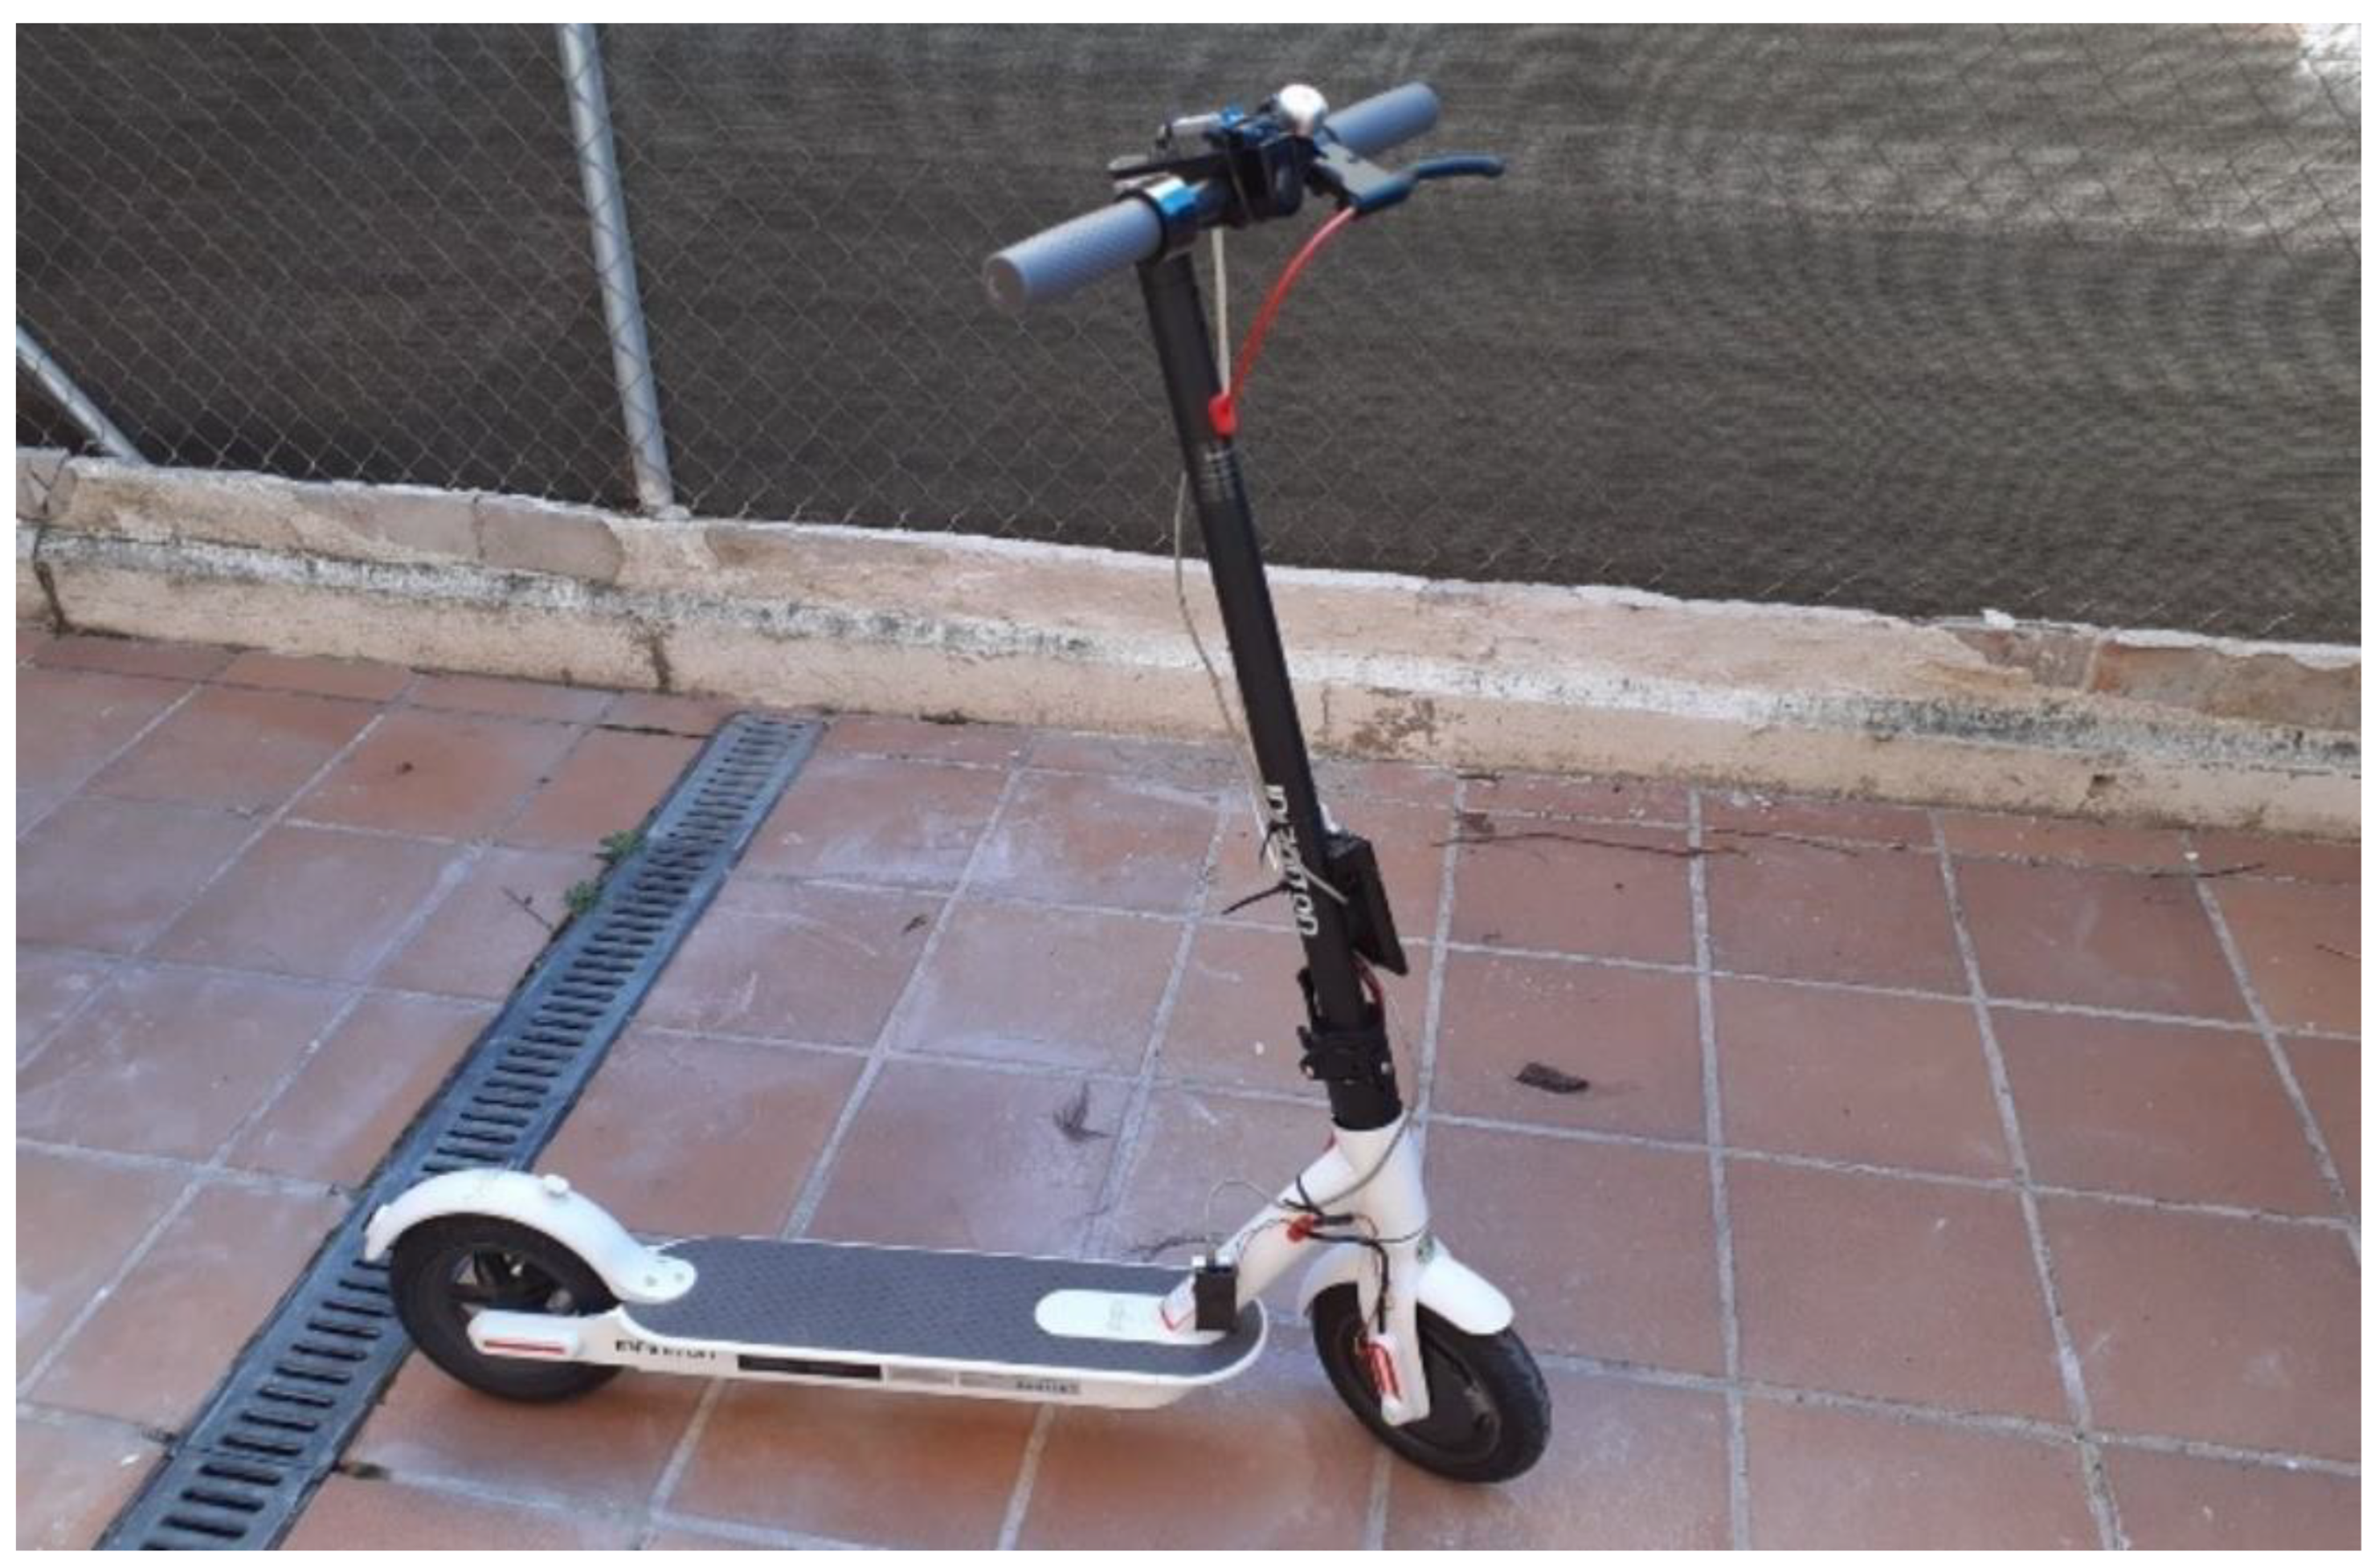 Machines | Free Full-Text | Analysis of E-Scooter Vibrations Risks for  Riding Comfort Based on Real Measurements